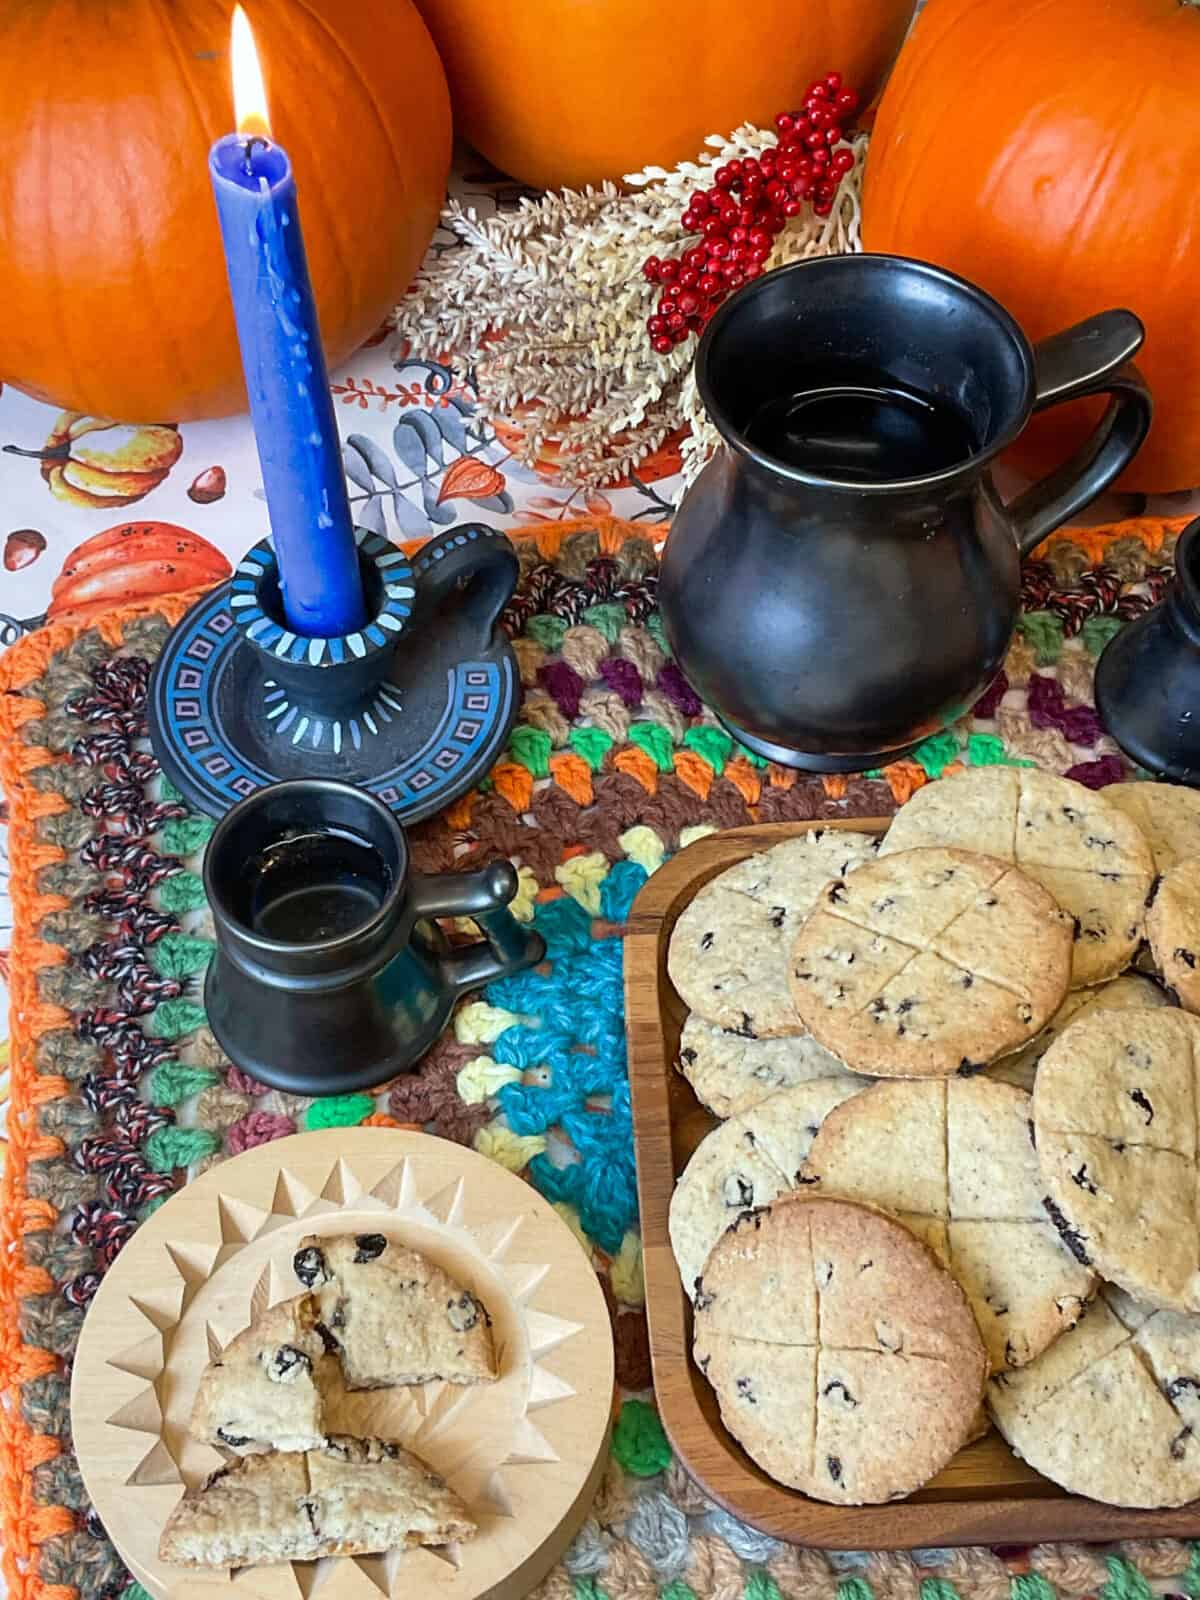 Blue candle lit beside pile of soul cakes and small wooden circle plate with a broken pieces of soul cake, three pumpkins in background with reeds and berry display.